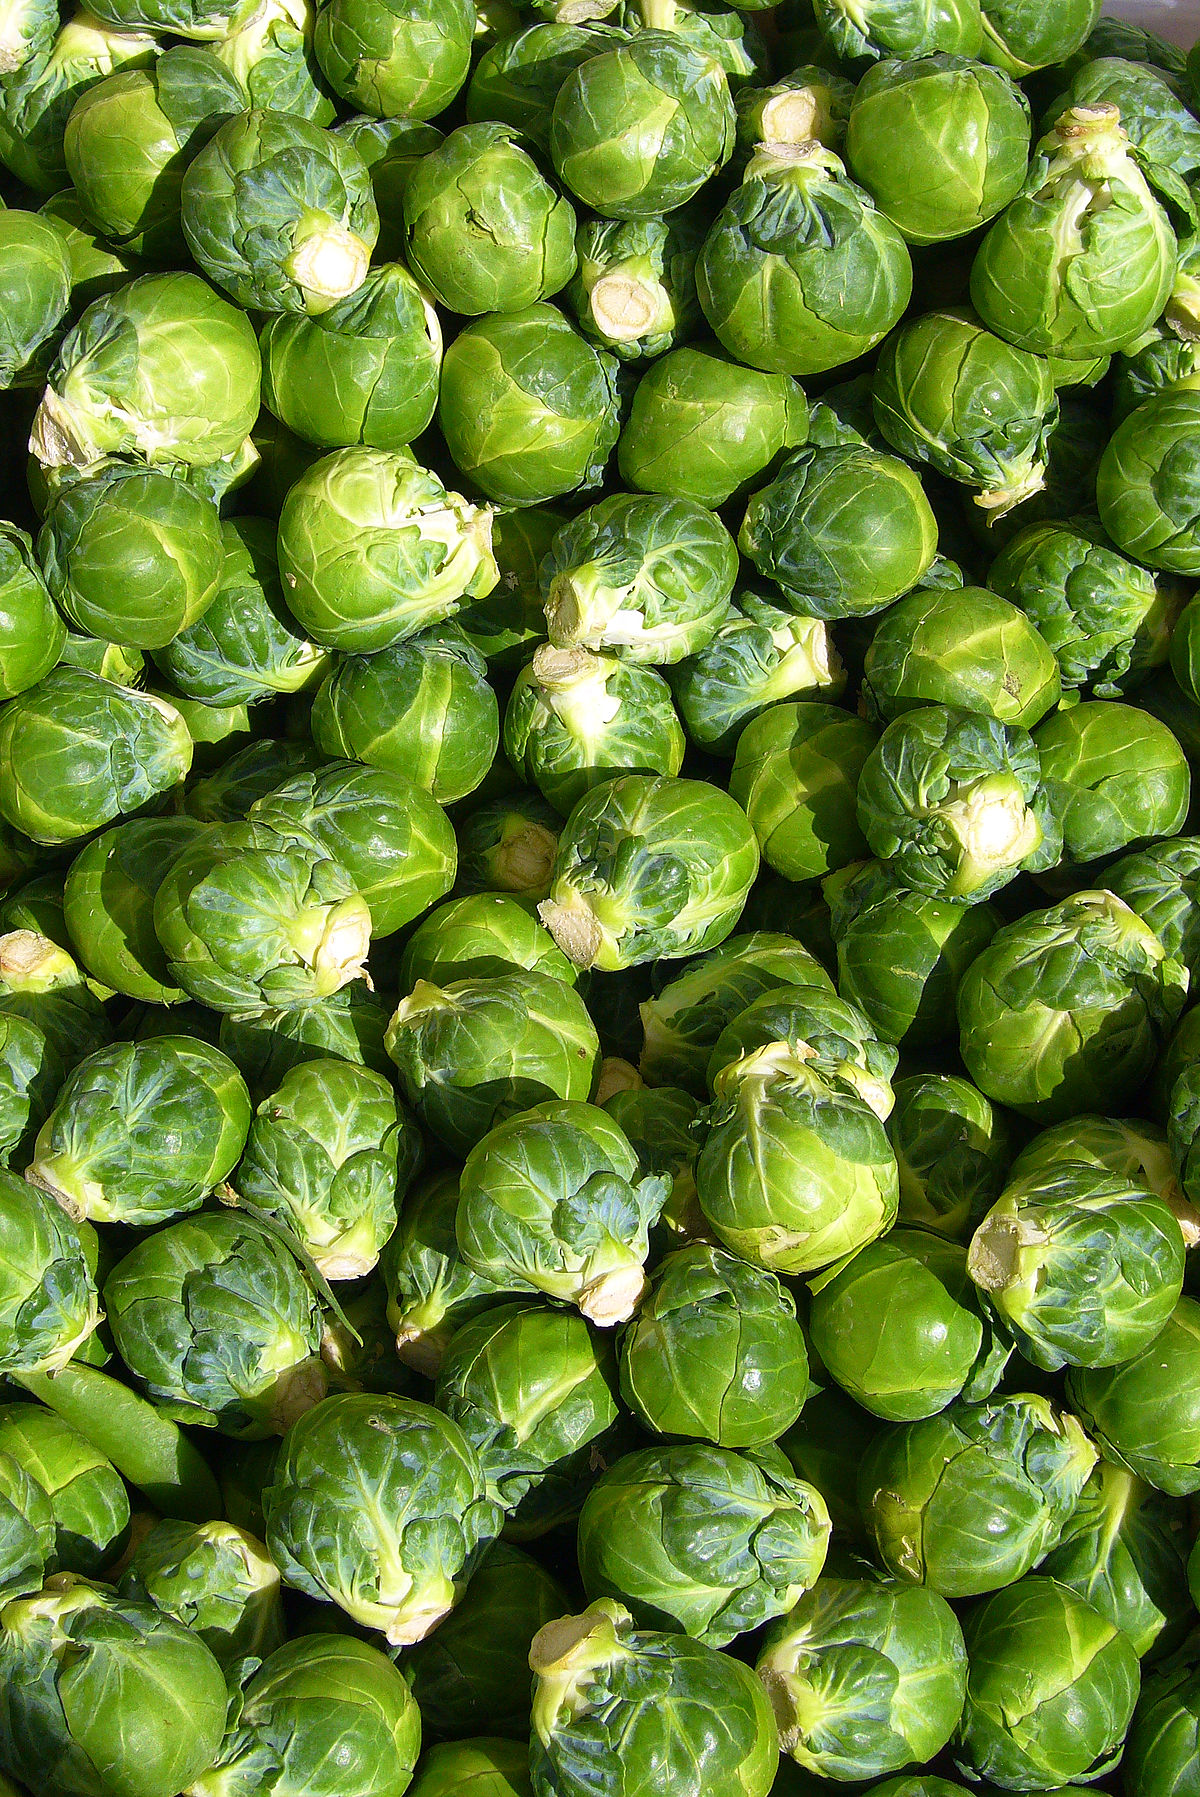 Brussels sprout - Wikipedia